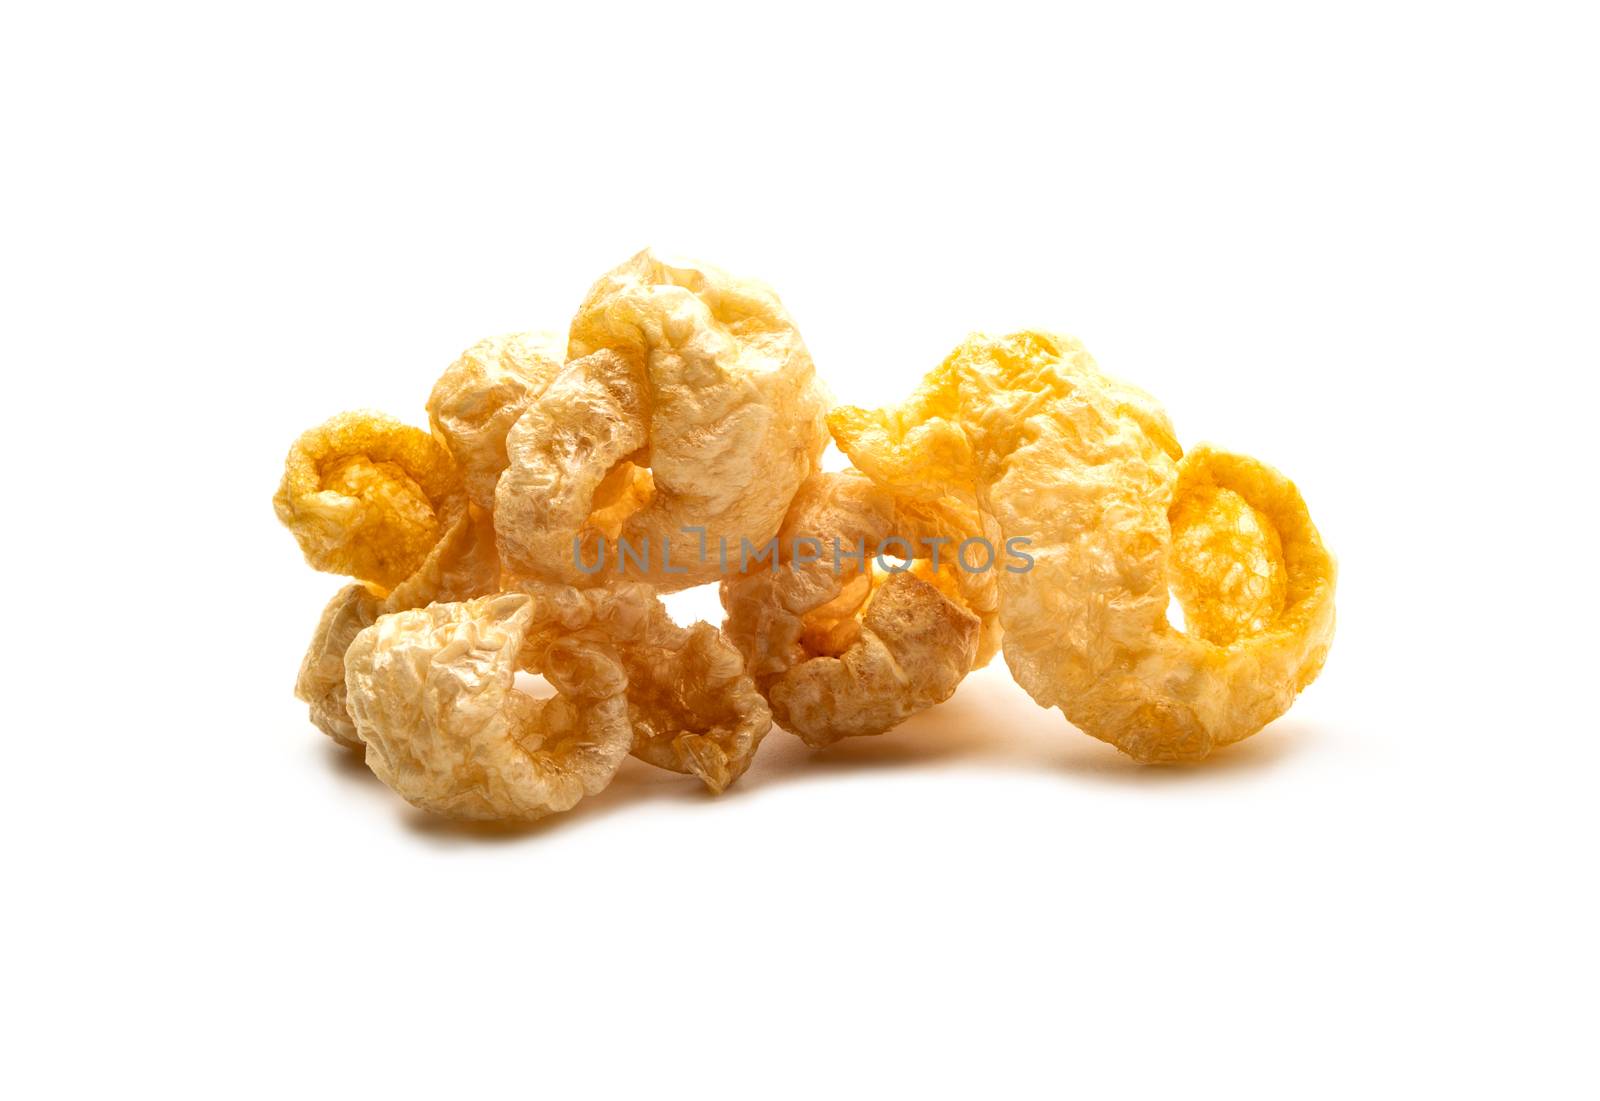 Pork snack crispy and blistered isolated on white background. Crispy pork skin pieces. Food concept.